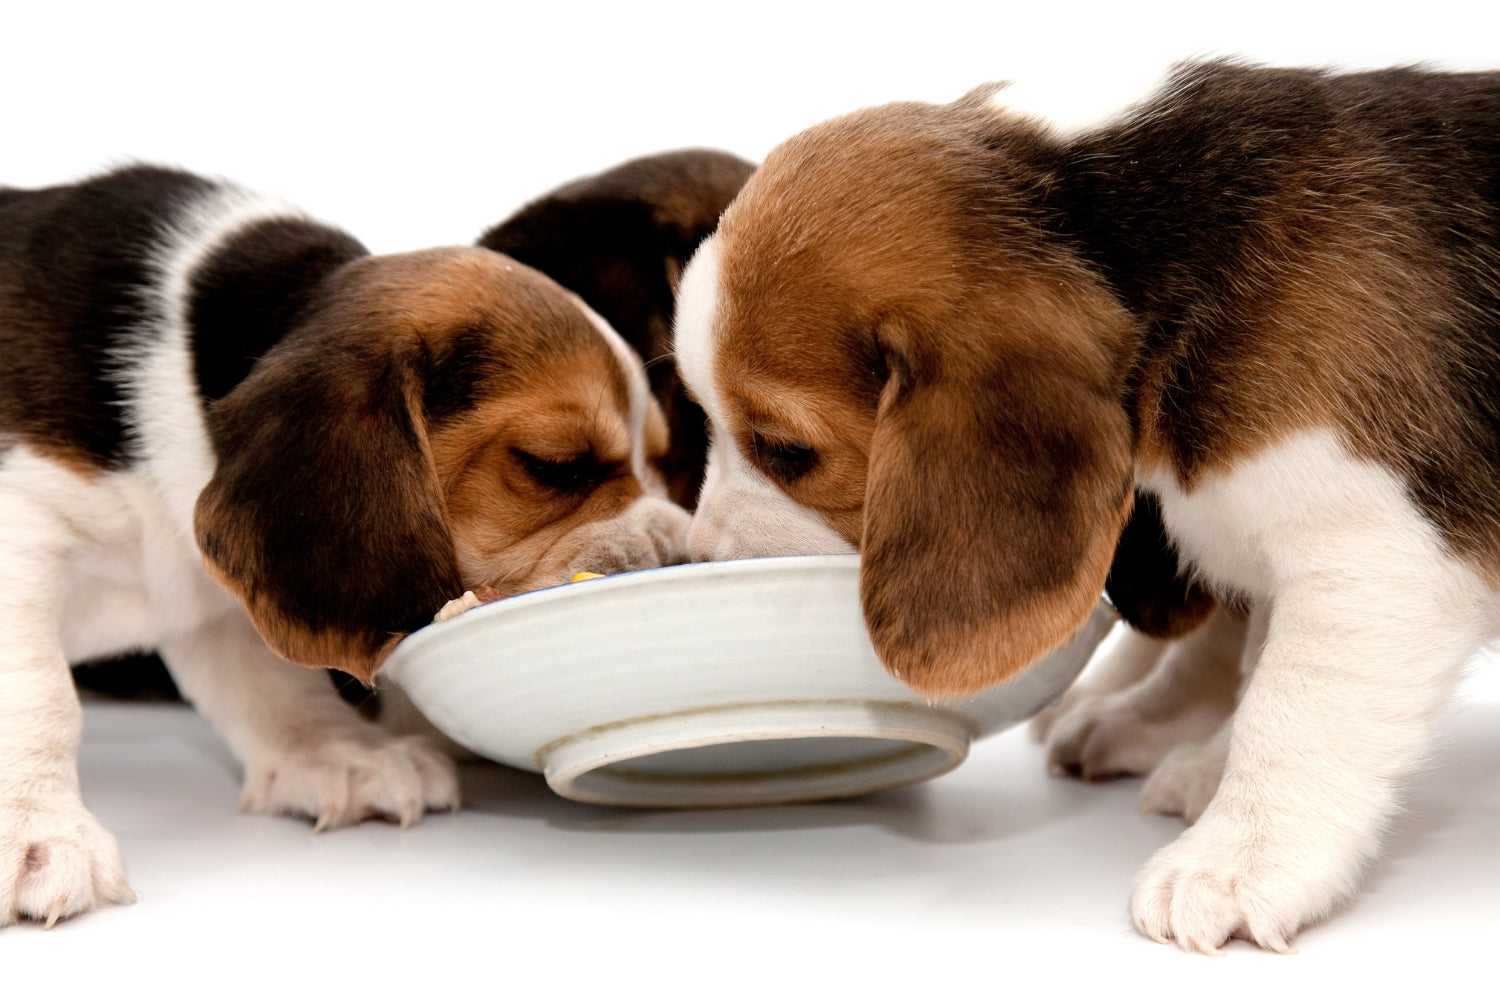 Puppies eating, choosing the right food for a puppy